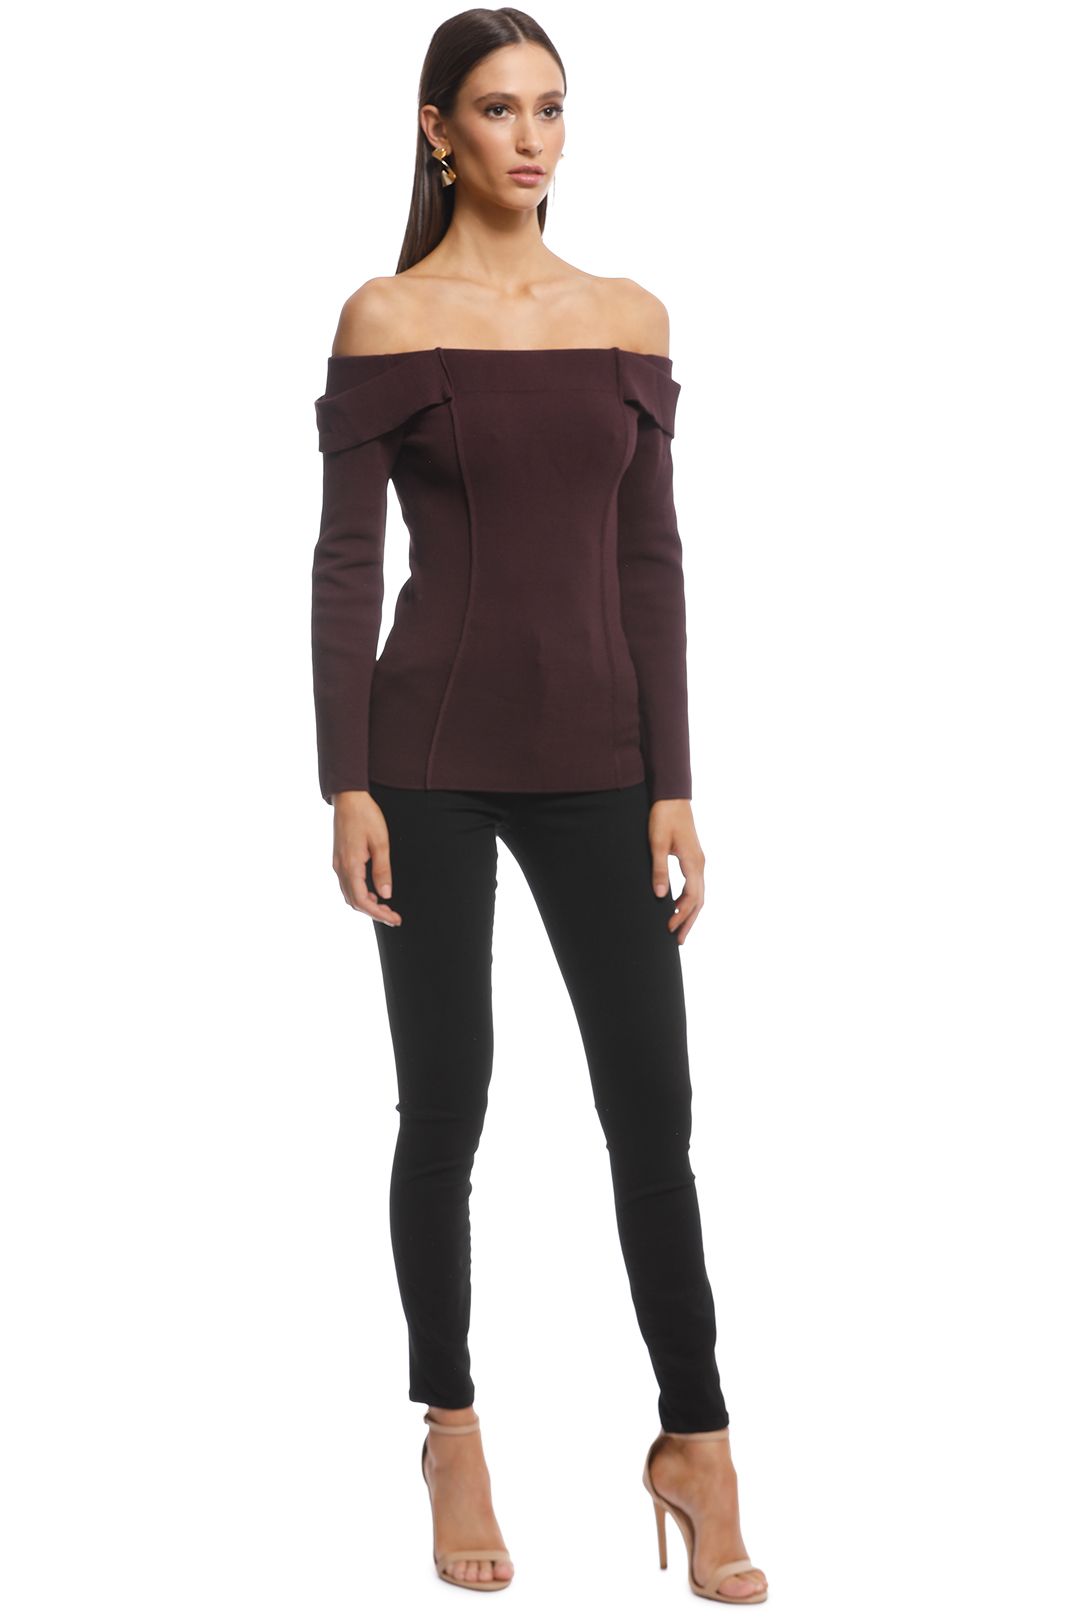 Camilla and Marc - Carole Knit Top - Burgundy - Side